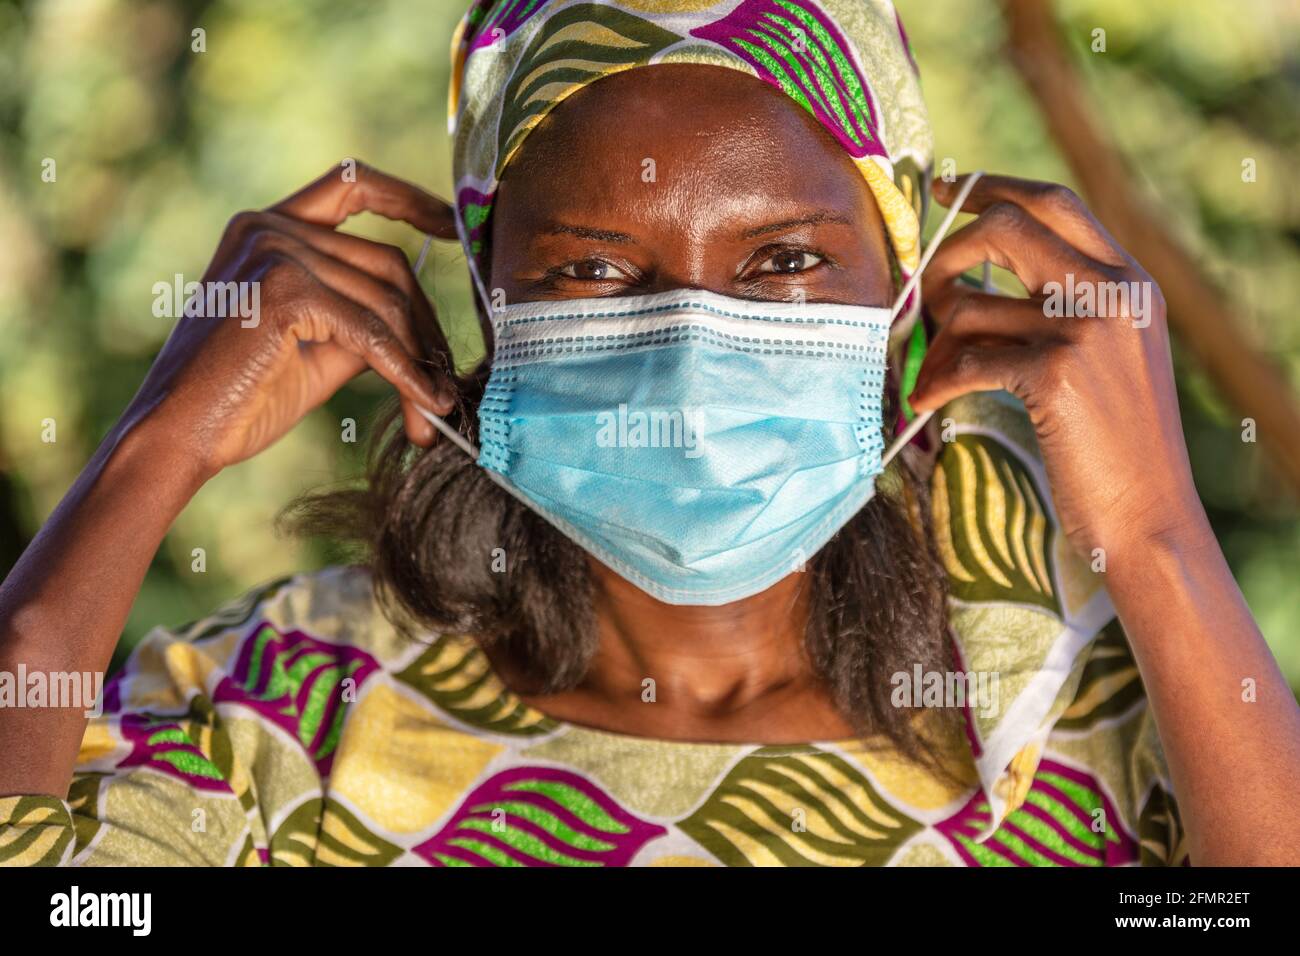 African middle aged woman, female in Africa, wearing traditional clothes and putting on face mask in Coronavirus COVID-19 pandemic Stock Photo